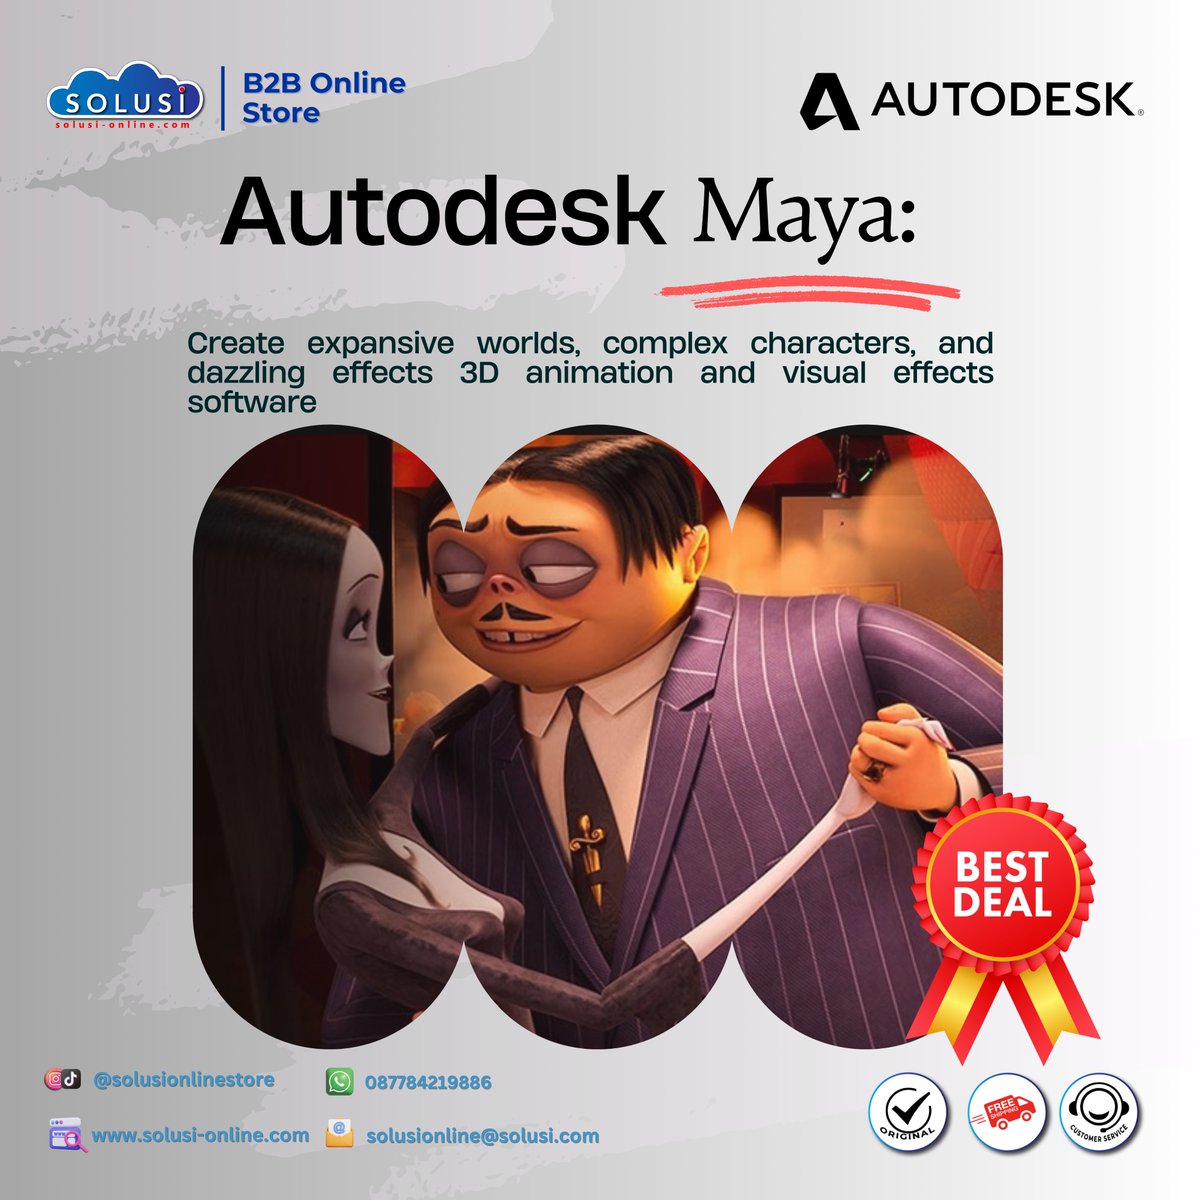 Step into the realm of limitless creativity with Autodesk Maya🌟. Unleash your imagination to craft breathtaking worlds and mesmerizing characters

Shop Now : solusi-online.com/product/autode…

 #AutodeskMaya #3DAnimation #License #Software #SolusiOnlineStore #ITSolution #B2BOnlineStore